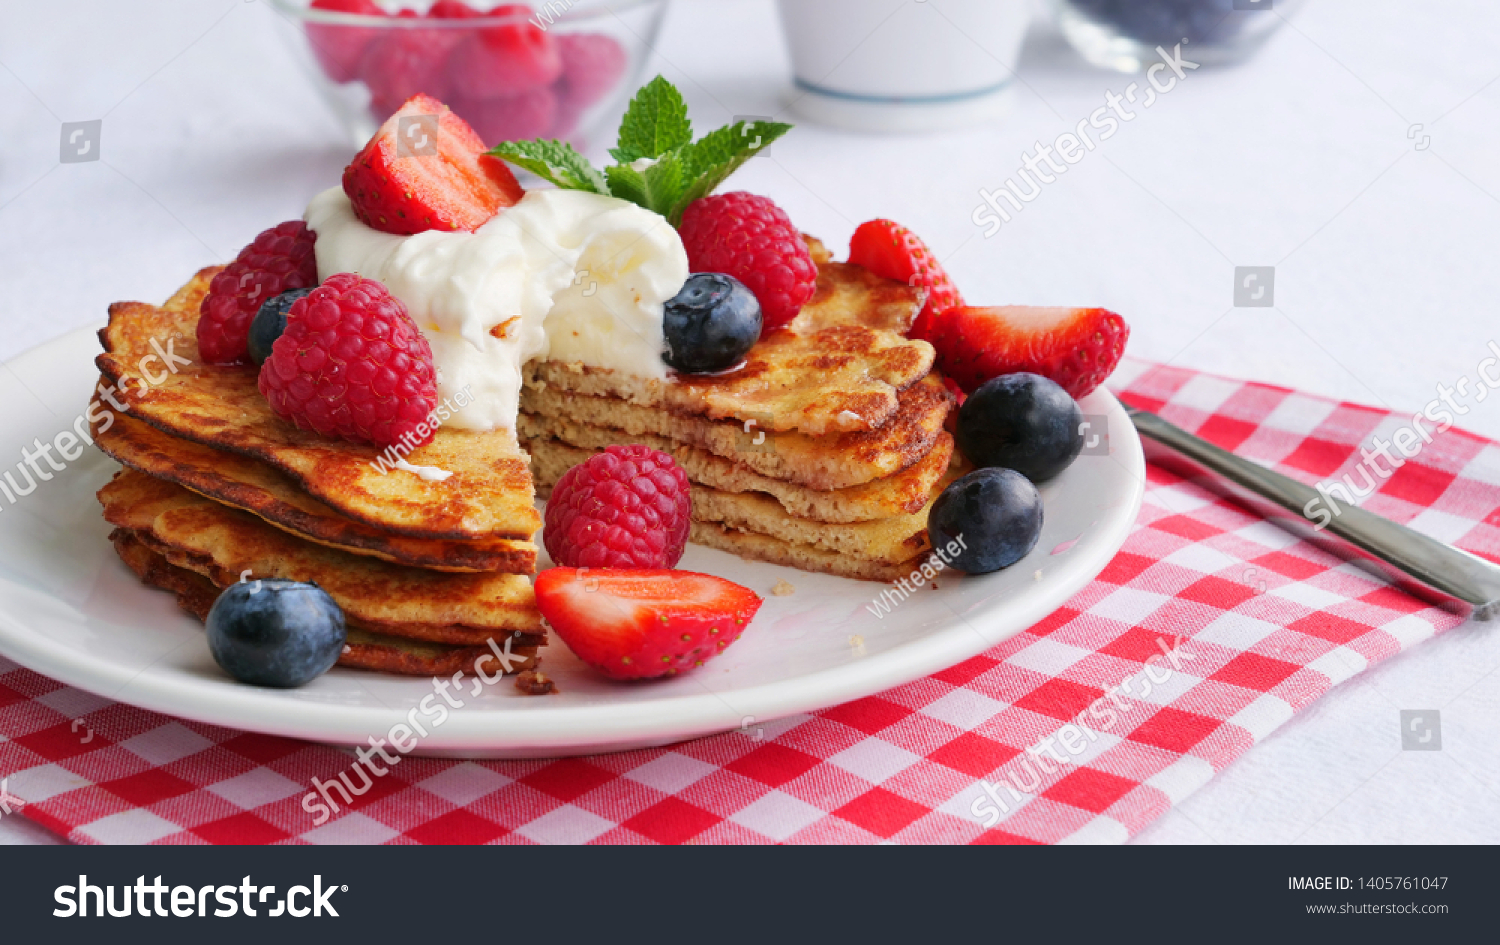 Stack of keto pancakes made of coconut flour or almond flour, served with berries and whipped cream on plate. One slice eaten already. #1405761047